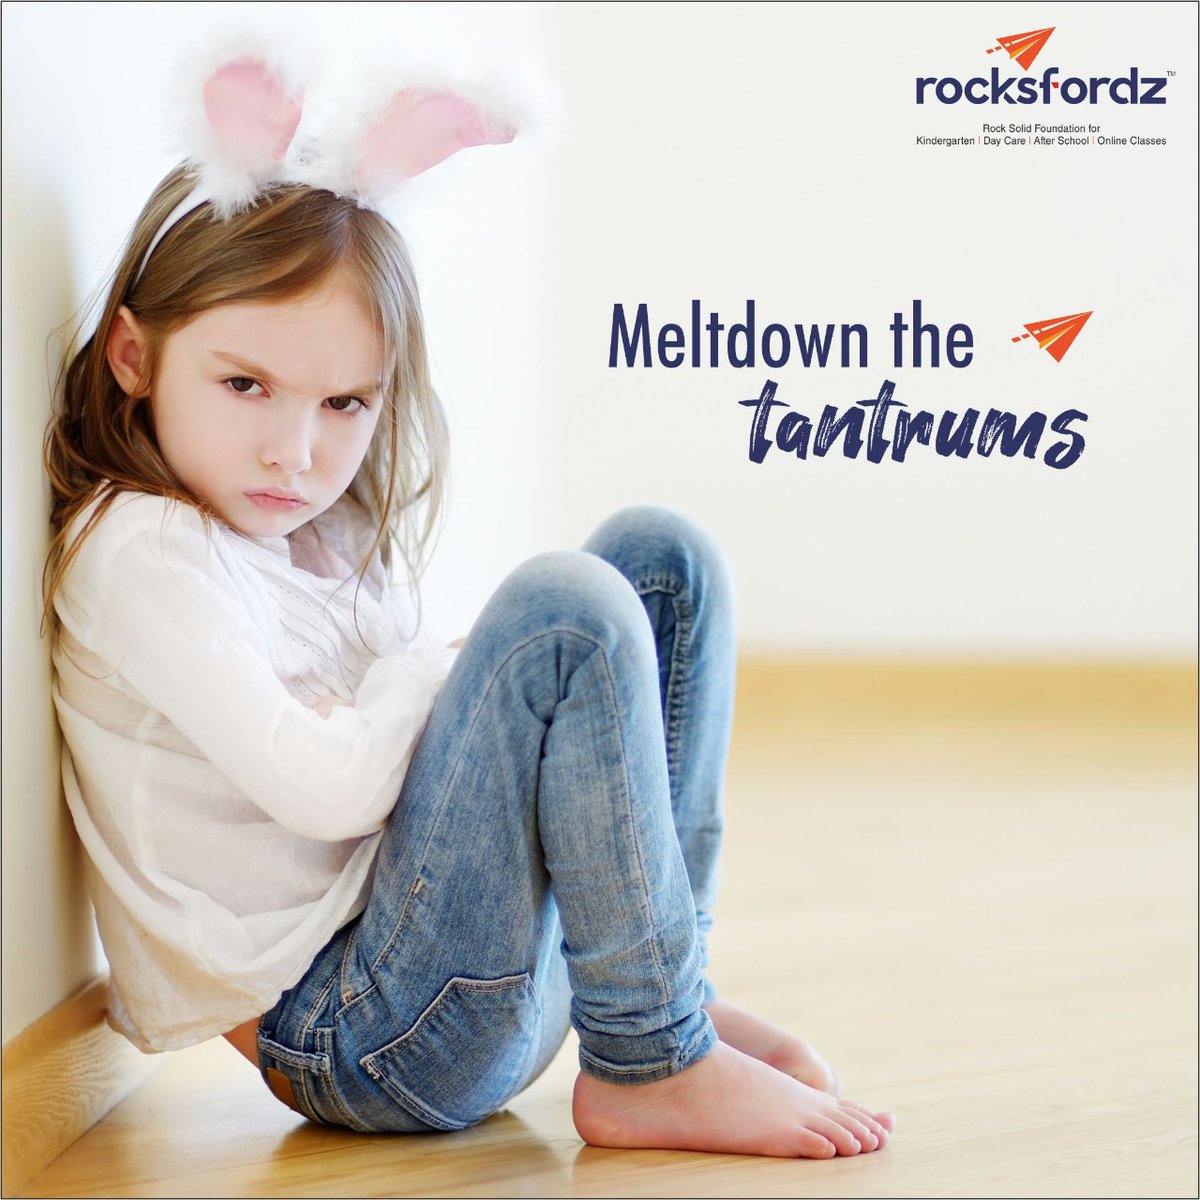 3 ways to meltdown those tantrums!
👉Talk to your child about their interests
👉Be polite and explain the reality
👉Give 2-3 best choices upfront
Do you suggest any other ideas? 
#rocksfordz #rocksfordzUK #rocksolidfoundation #kids  #education #supportchildren #kidsbehavior #fun